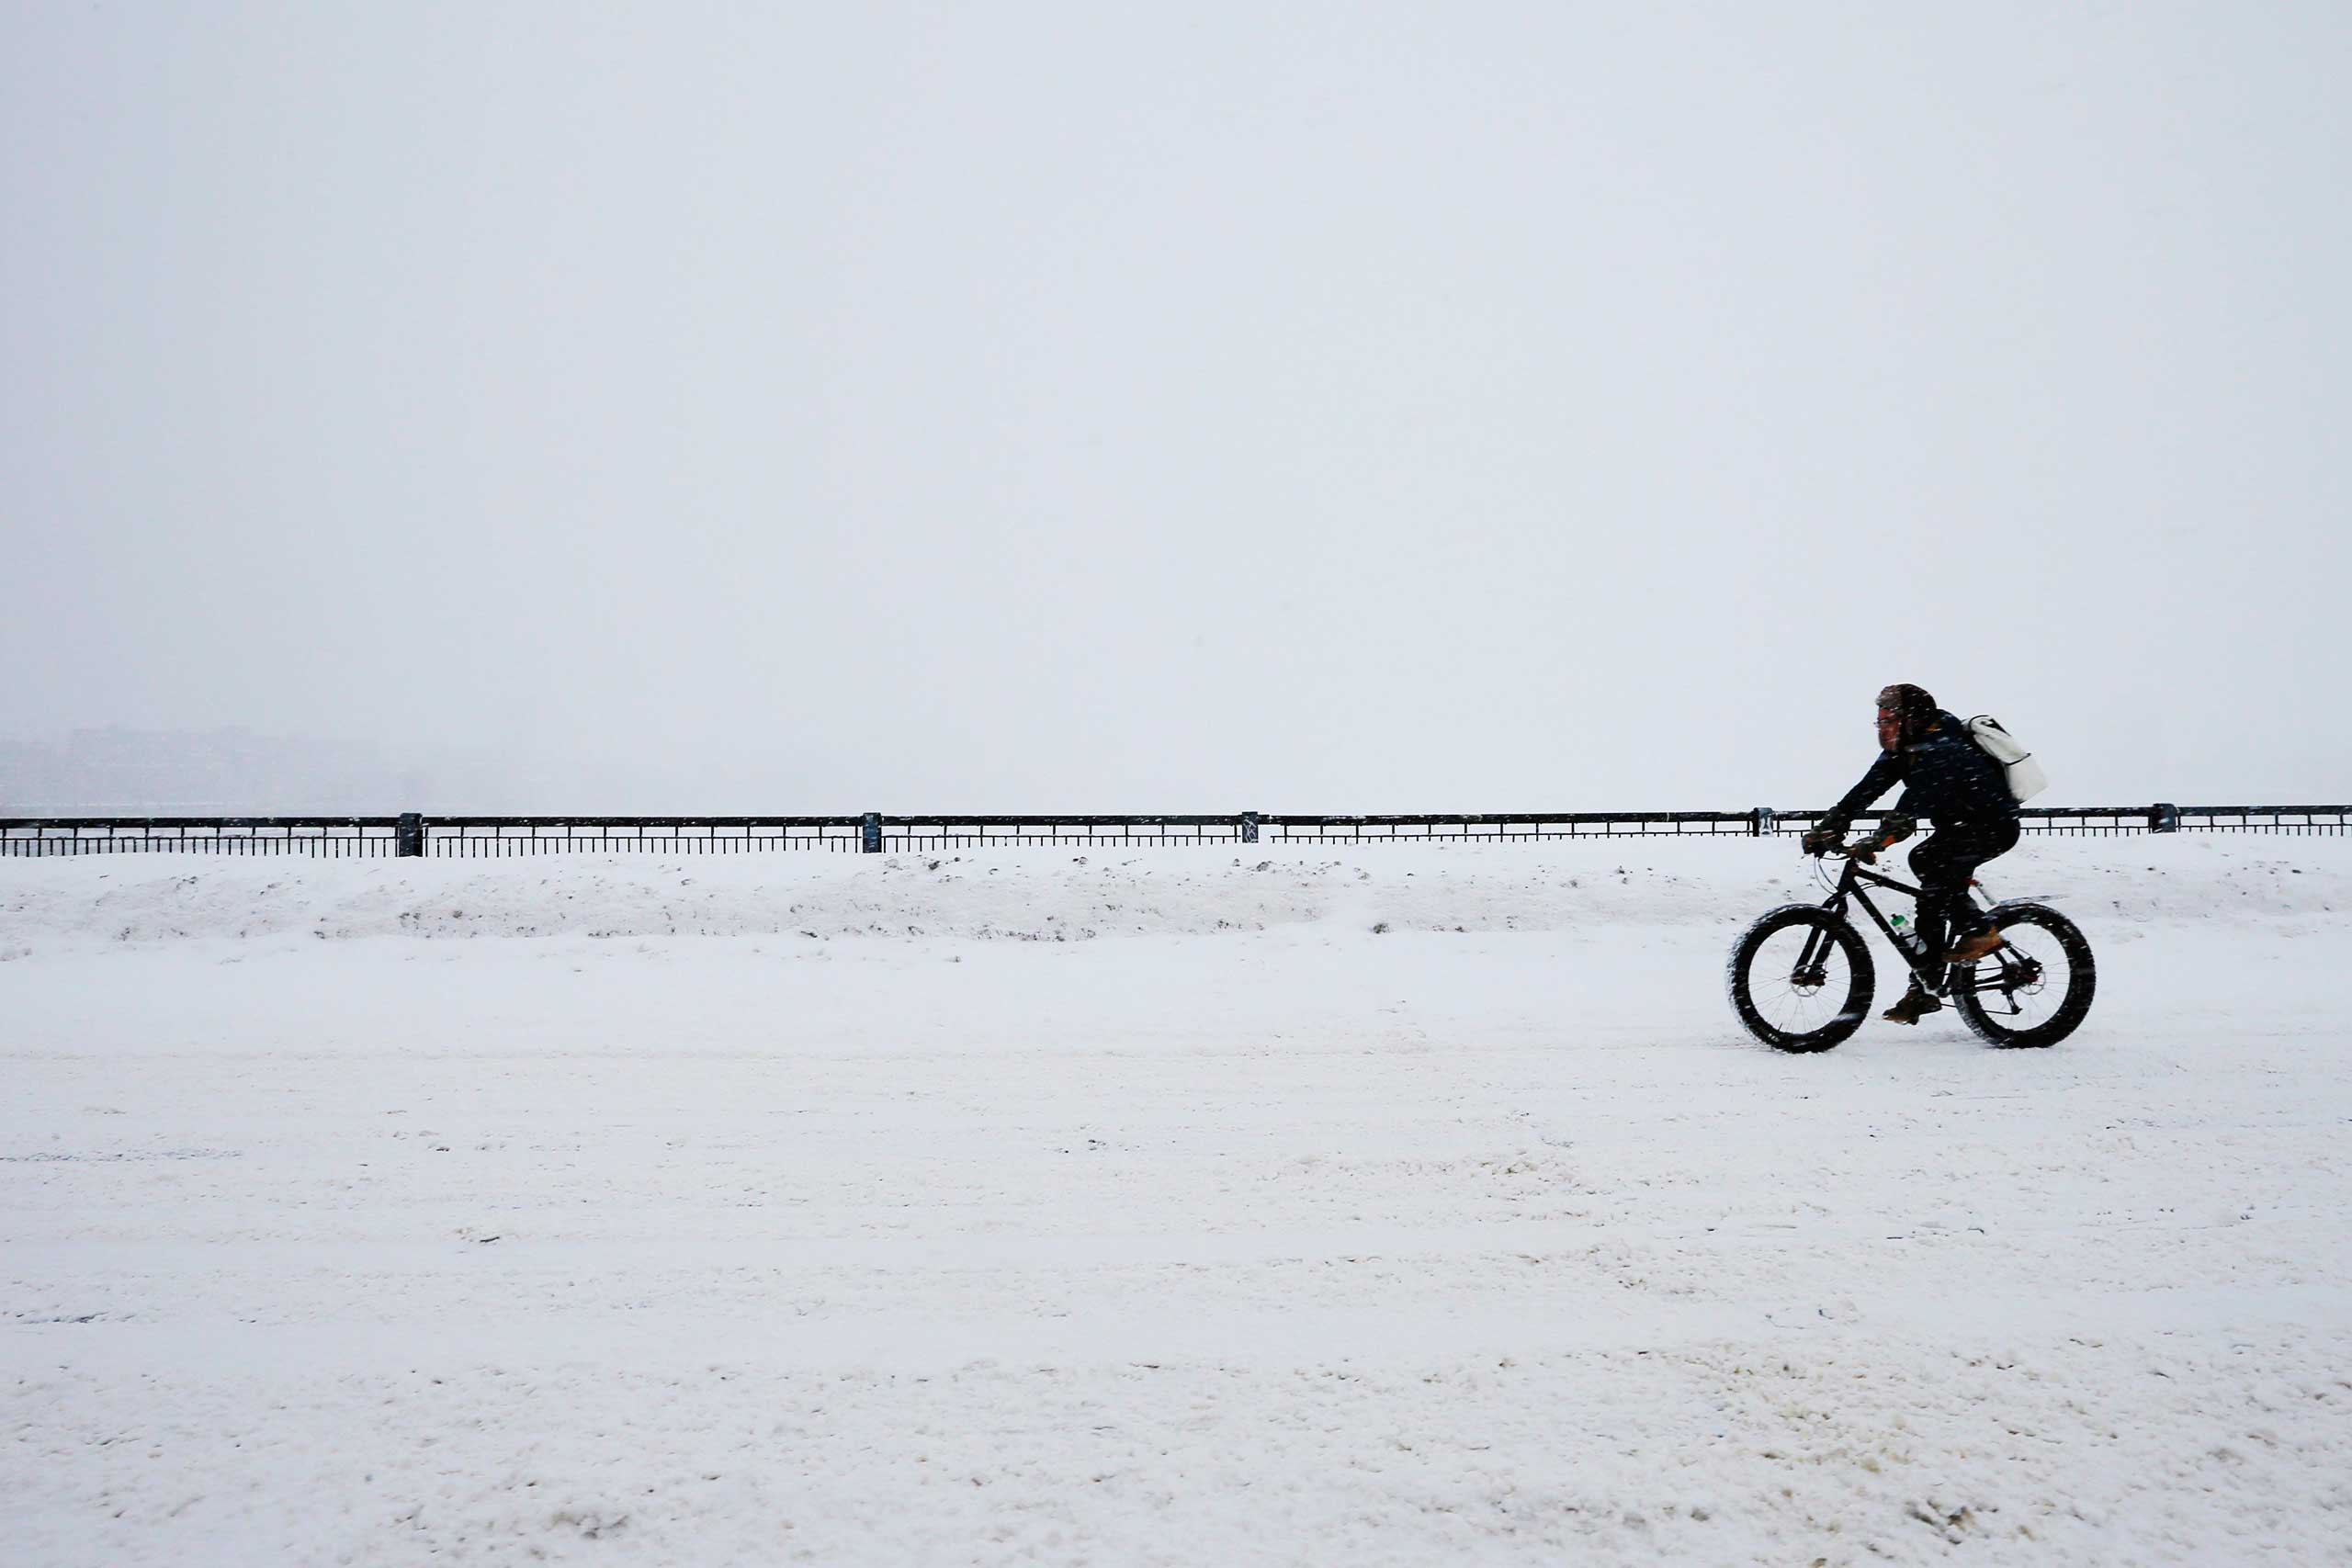 A cyclist rides across the Mass Ave bridge during a winter snow storm in Boston on Feb. 9, 2015.